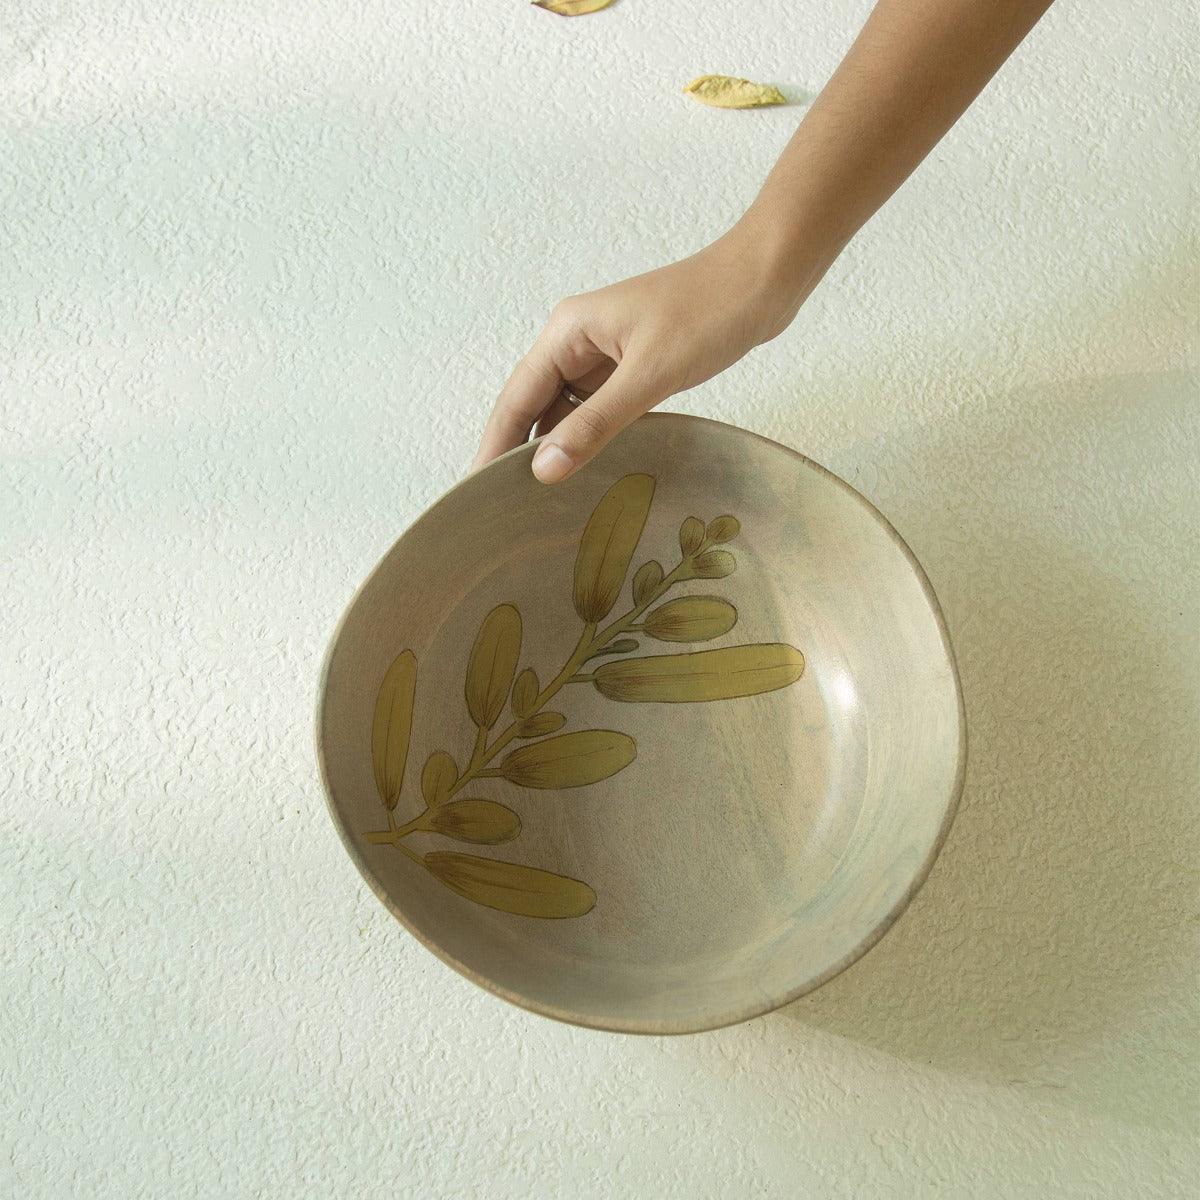 Wisteria Yellow Salad Bowl - ellementry